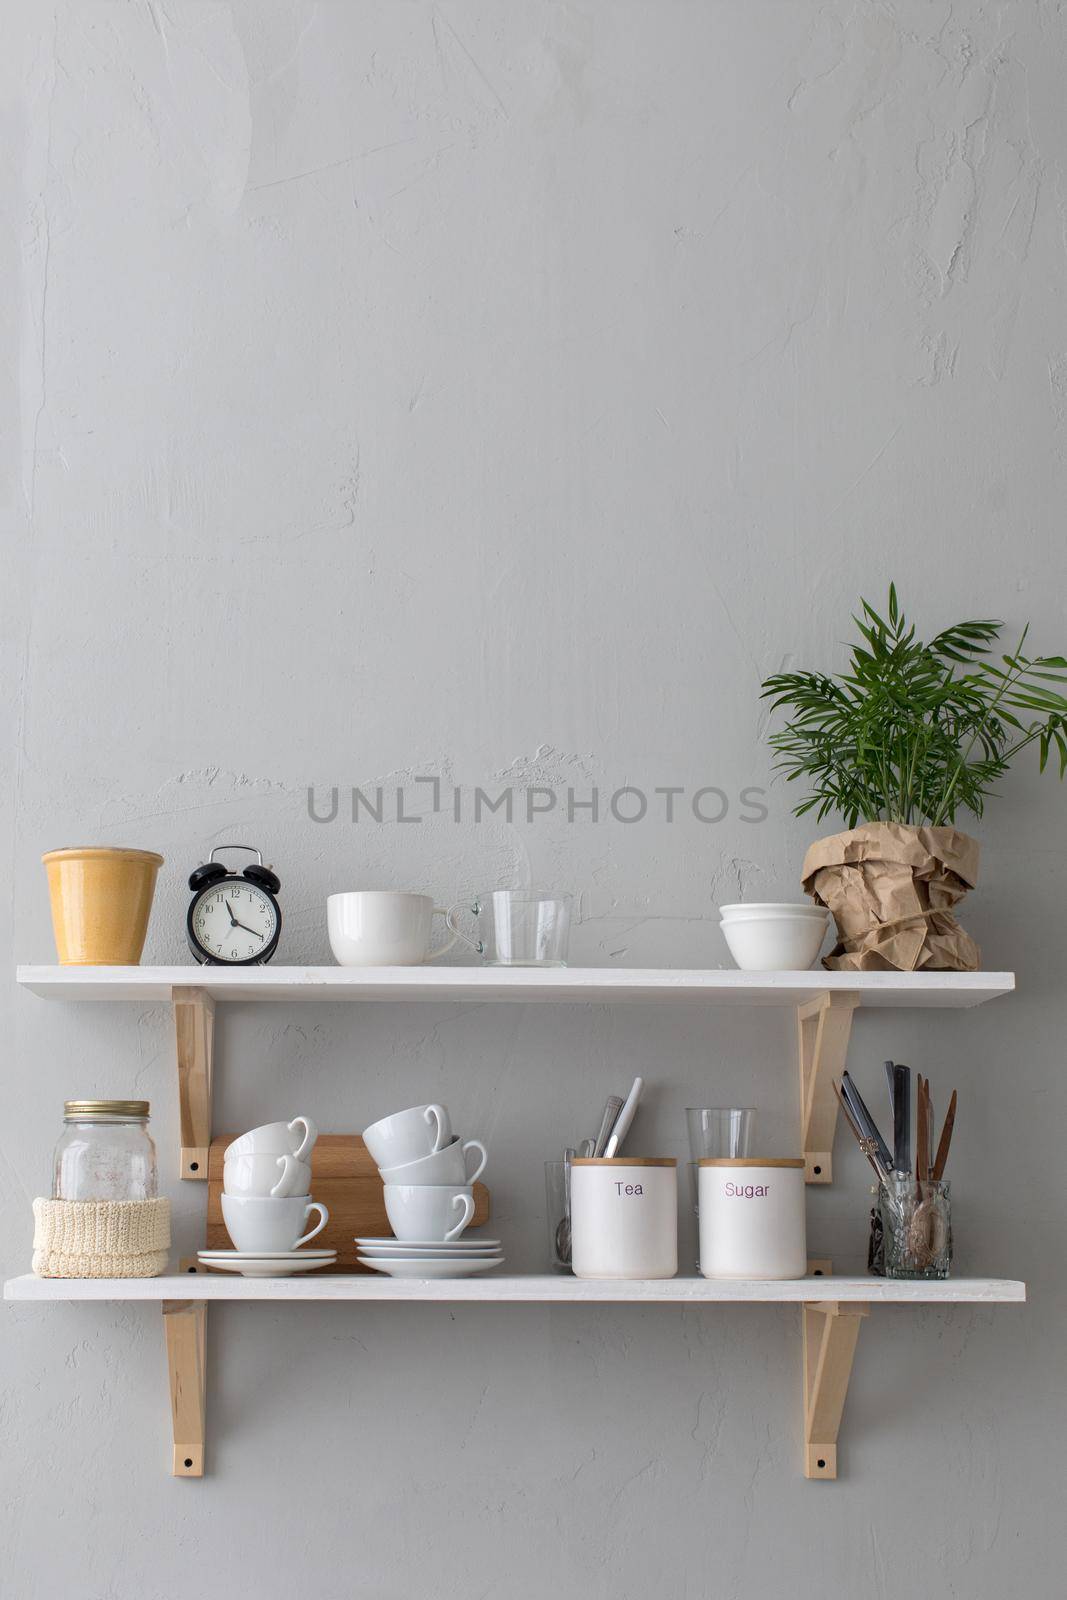 Close-up shelf with cups and different utensils.